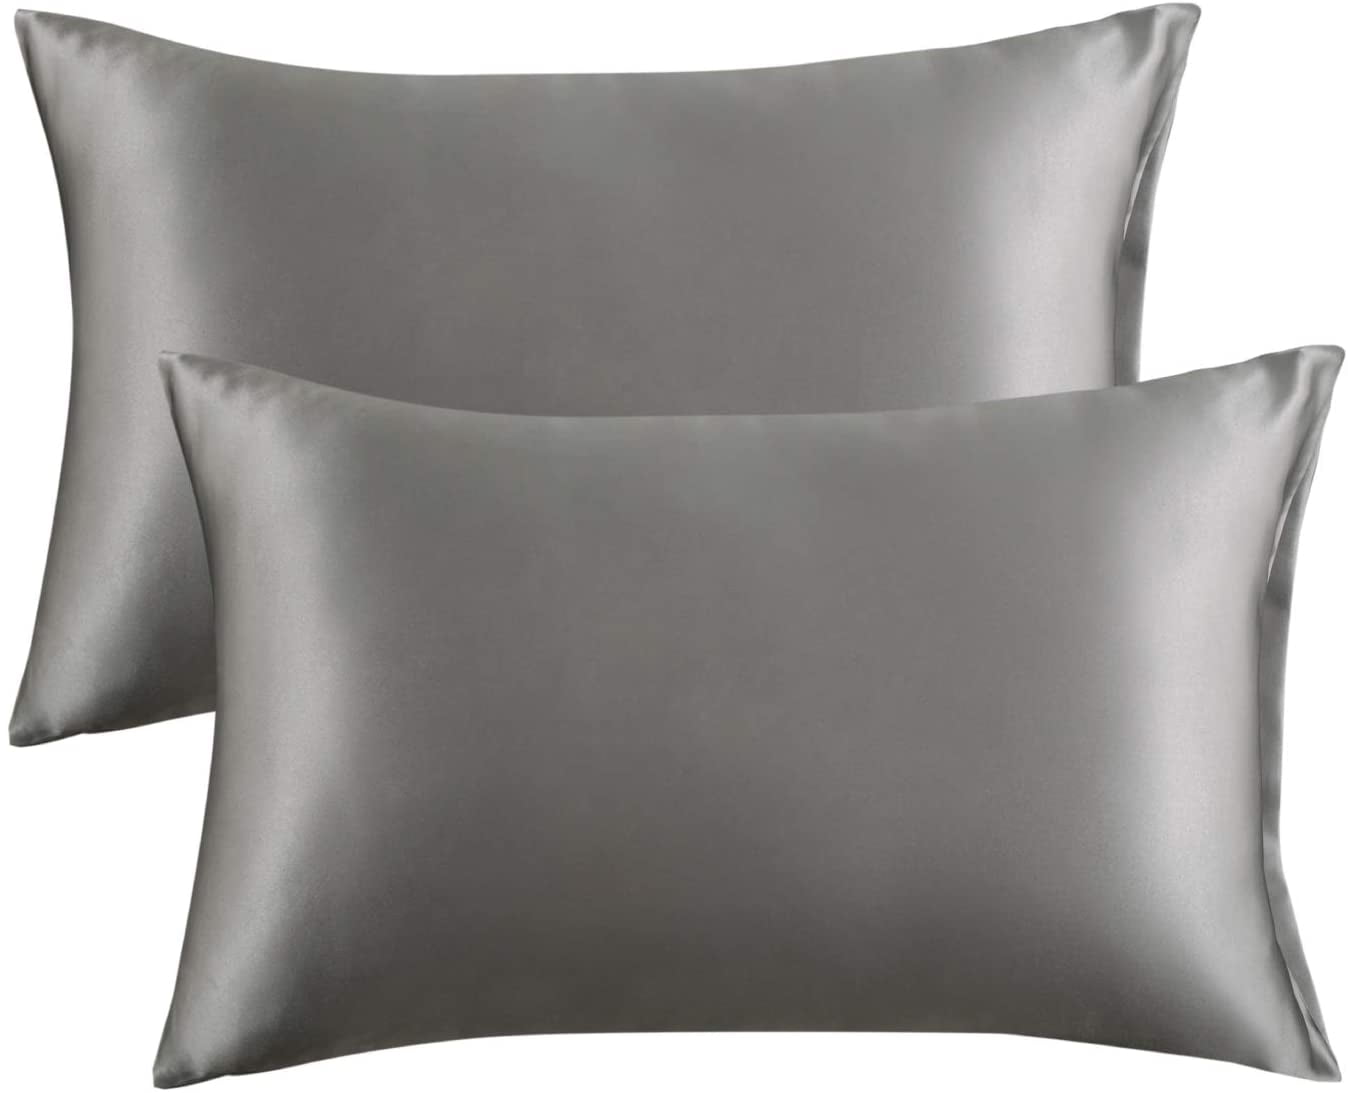 New Soft TWO Satin Pillowcases White or Black Standard Queen Size 